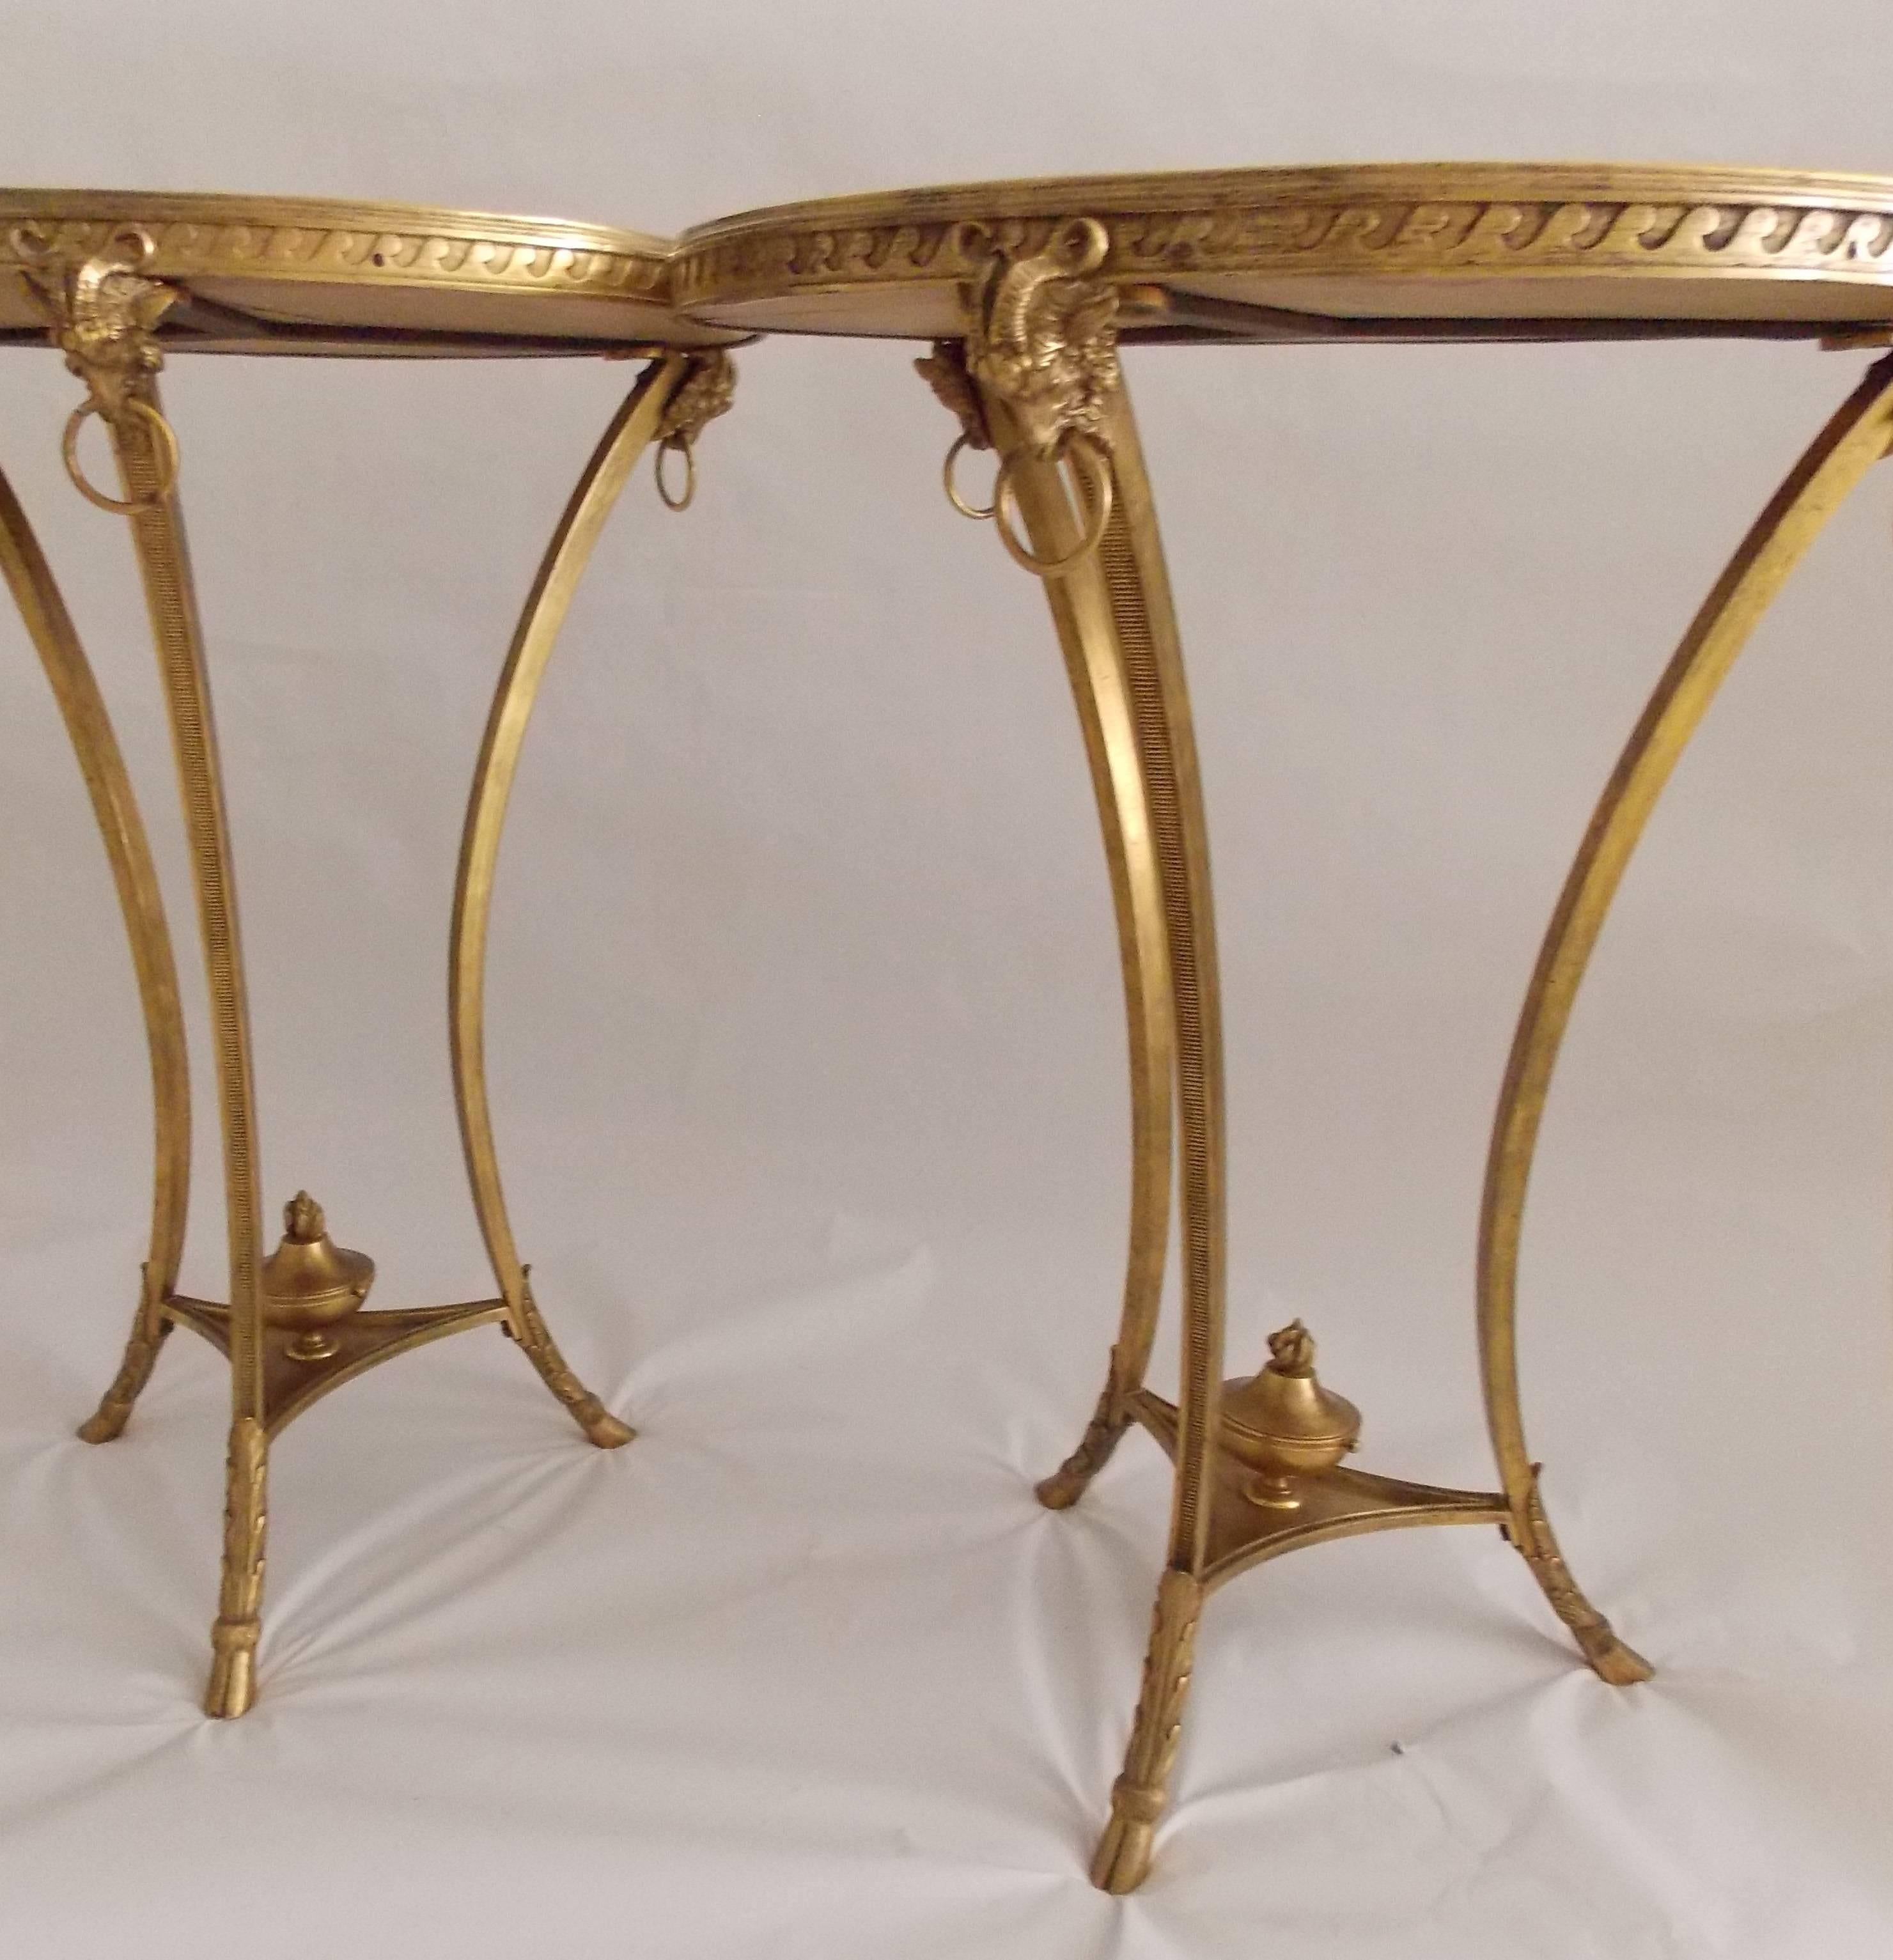 An exquisite, transitional pair of French Neoclassical style gilt bronze Gueridon tables with specimen bois de rose marble tops and ormolu ram's head and flaming urn detail. Each Gueridon is accented with acanthus leaves at the base and ends with a